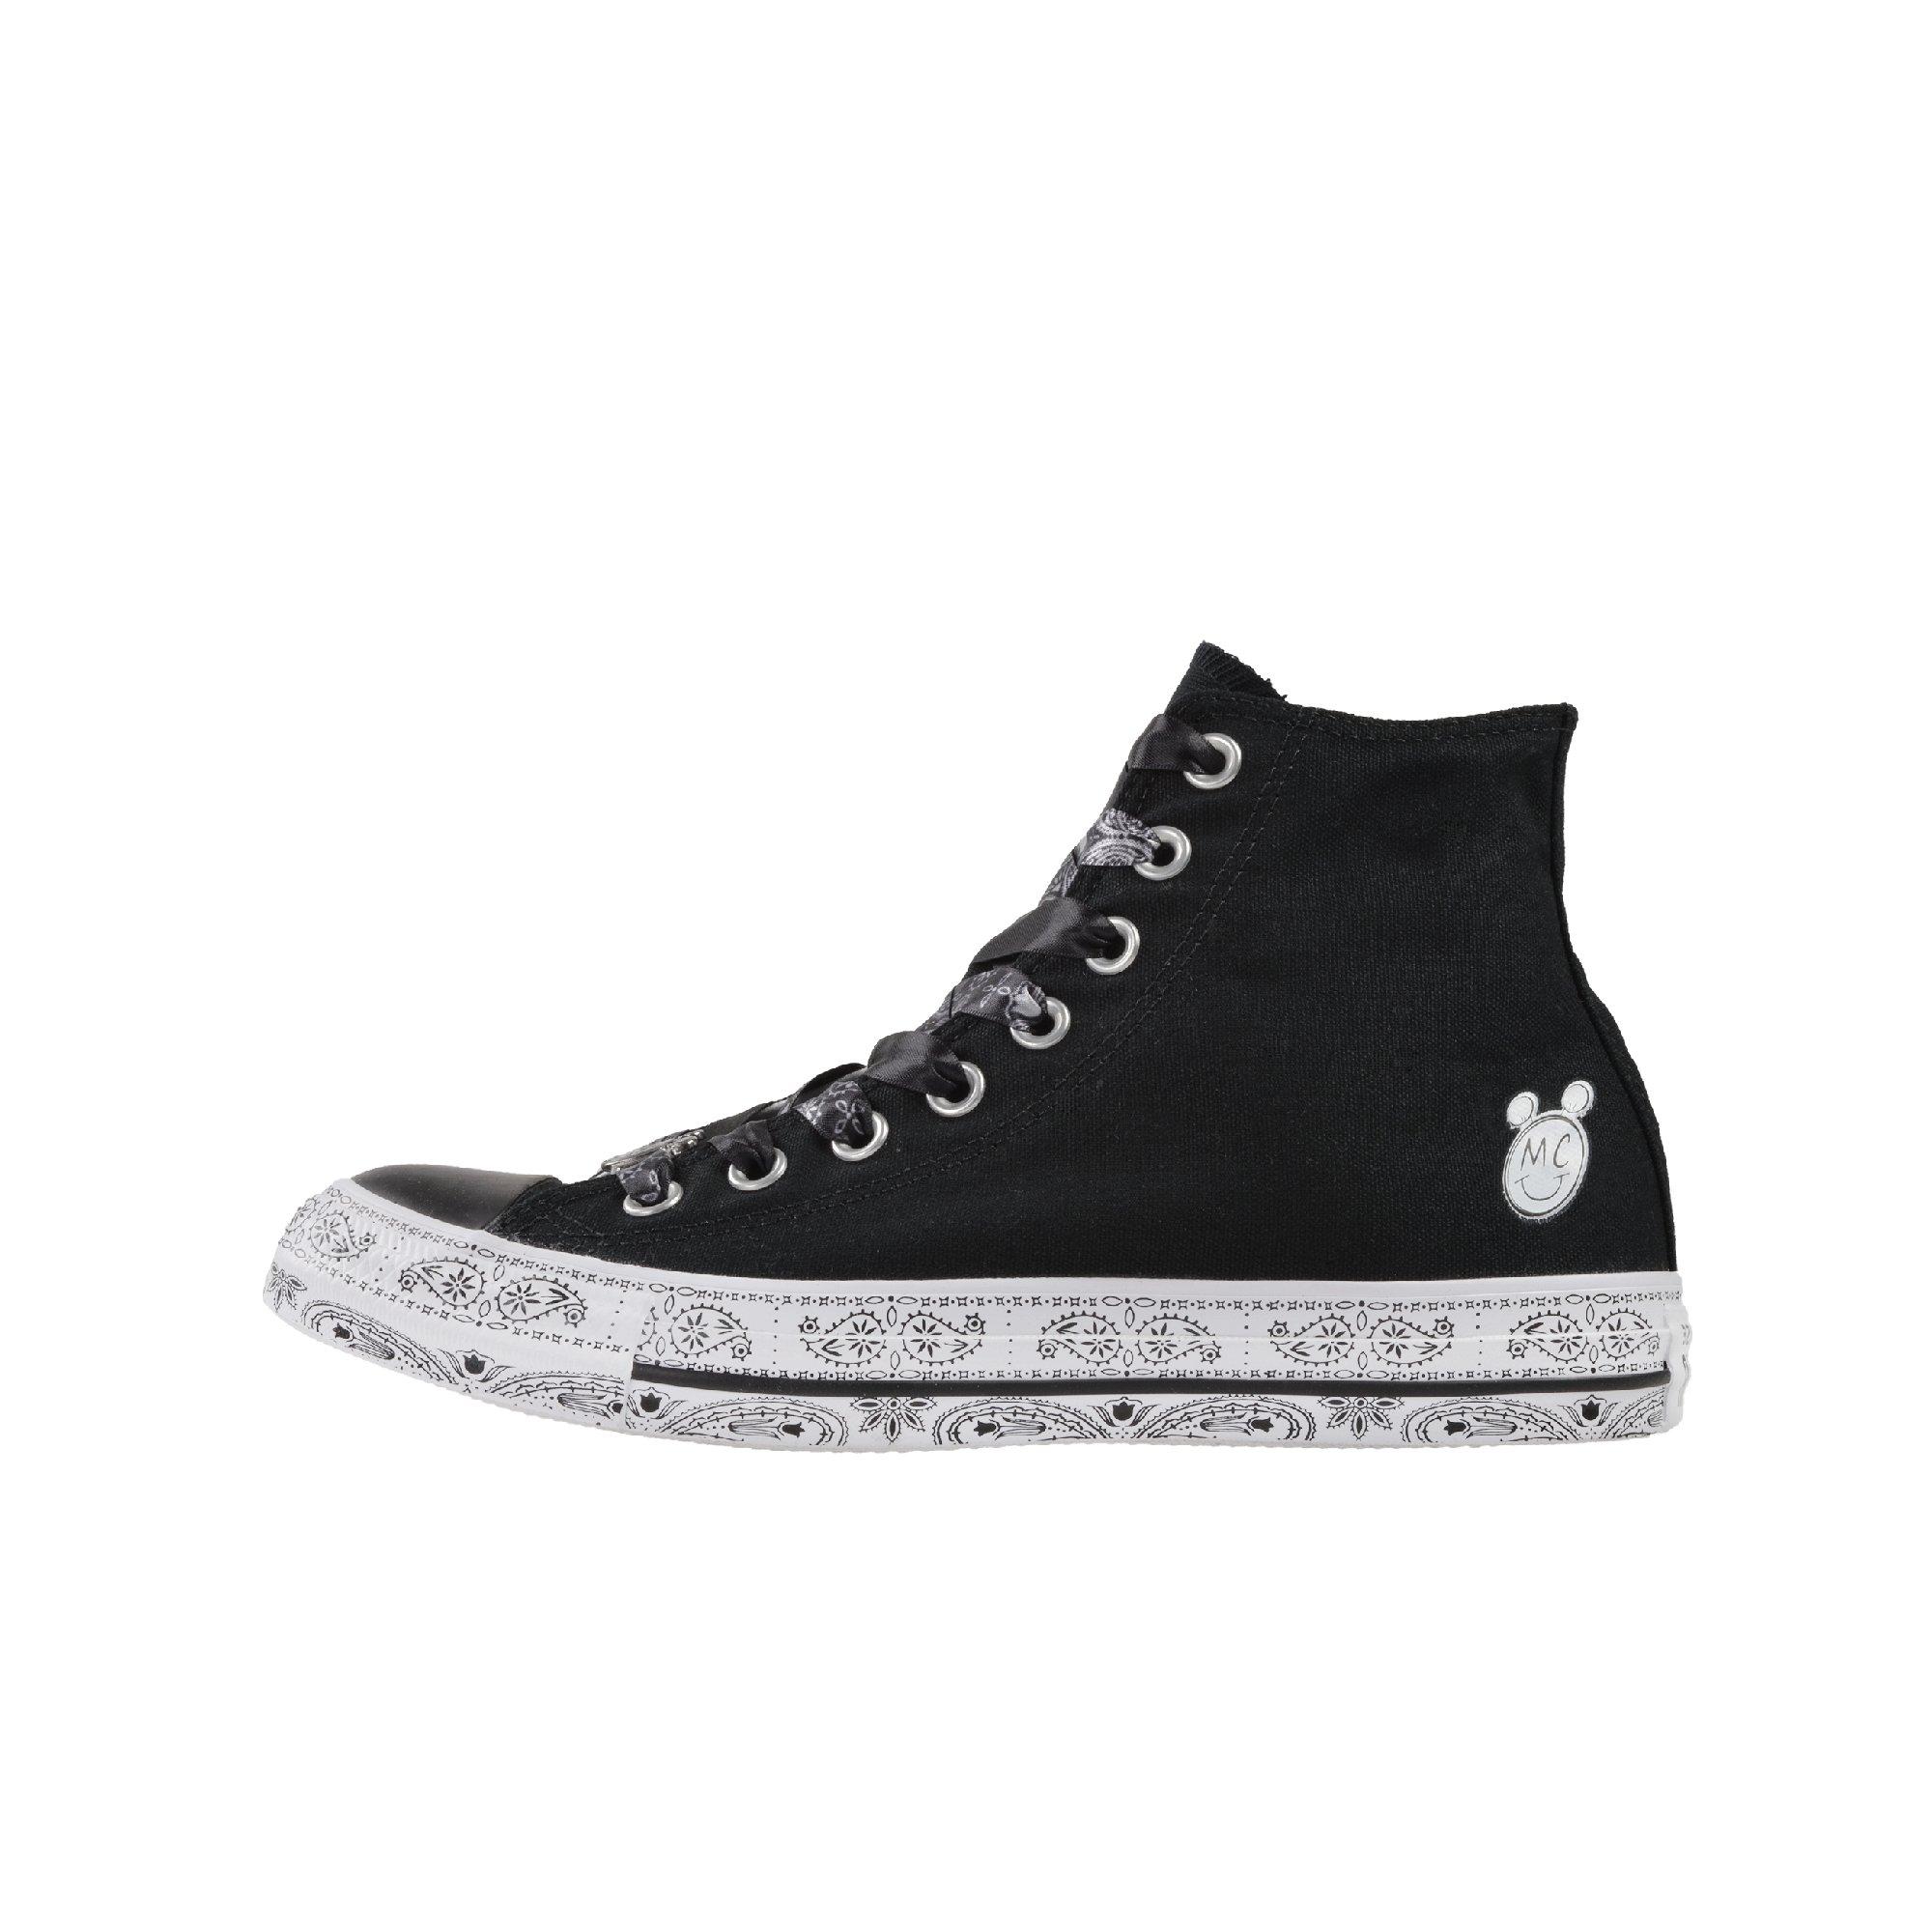 converse for miley